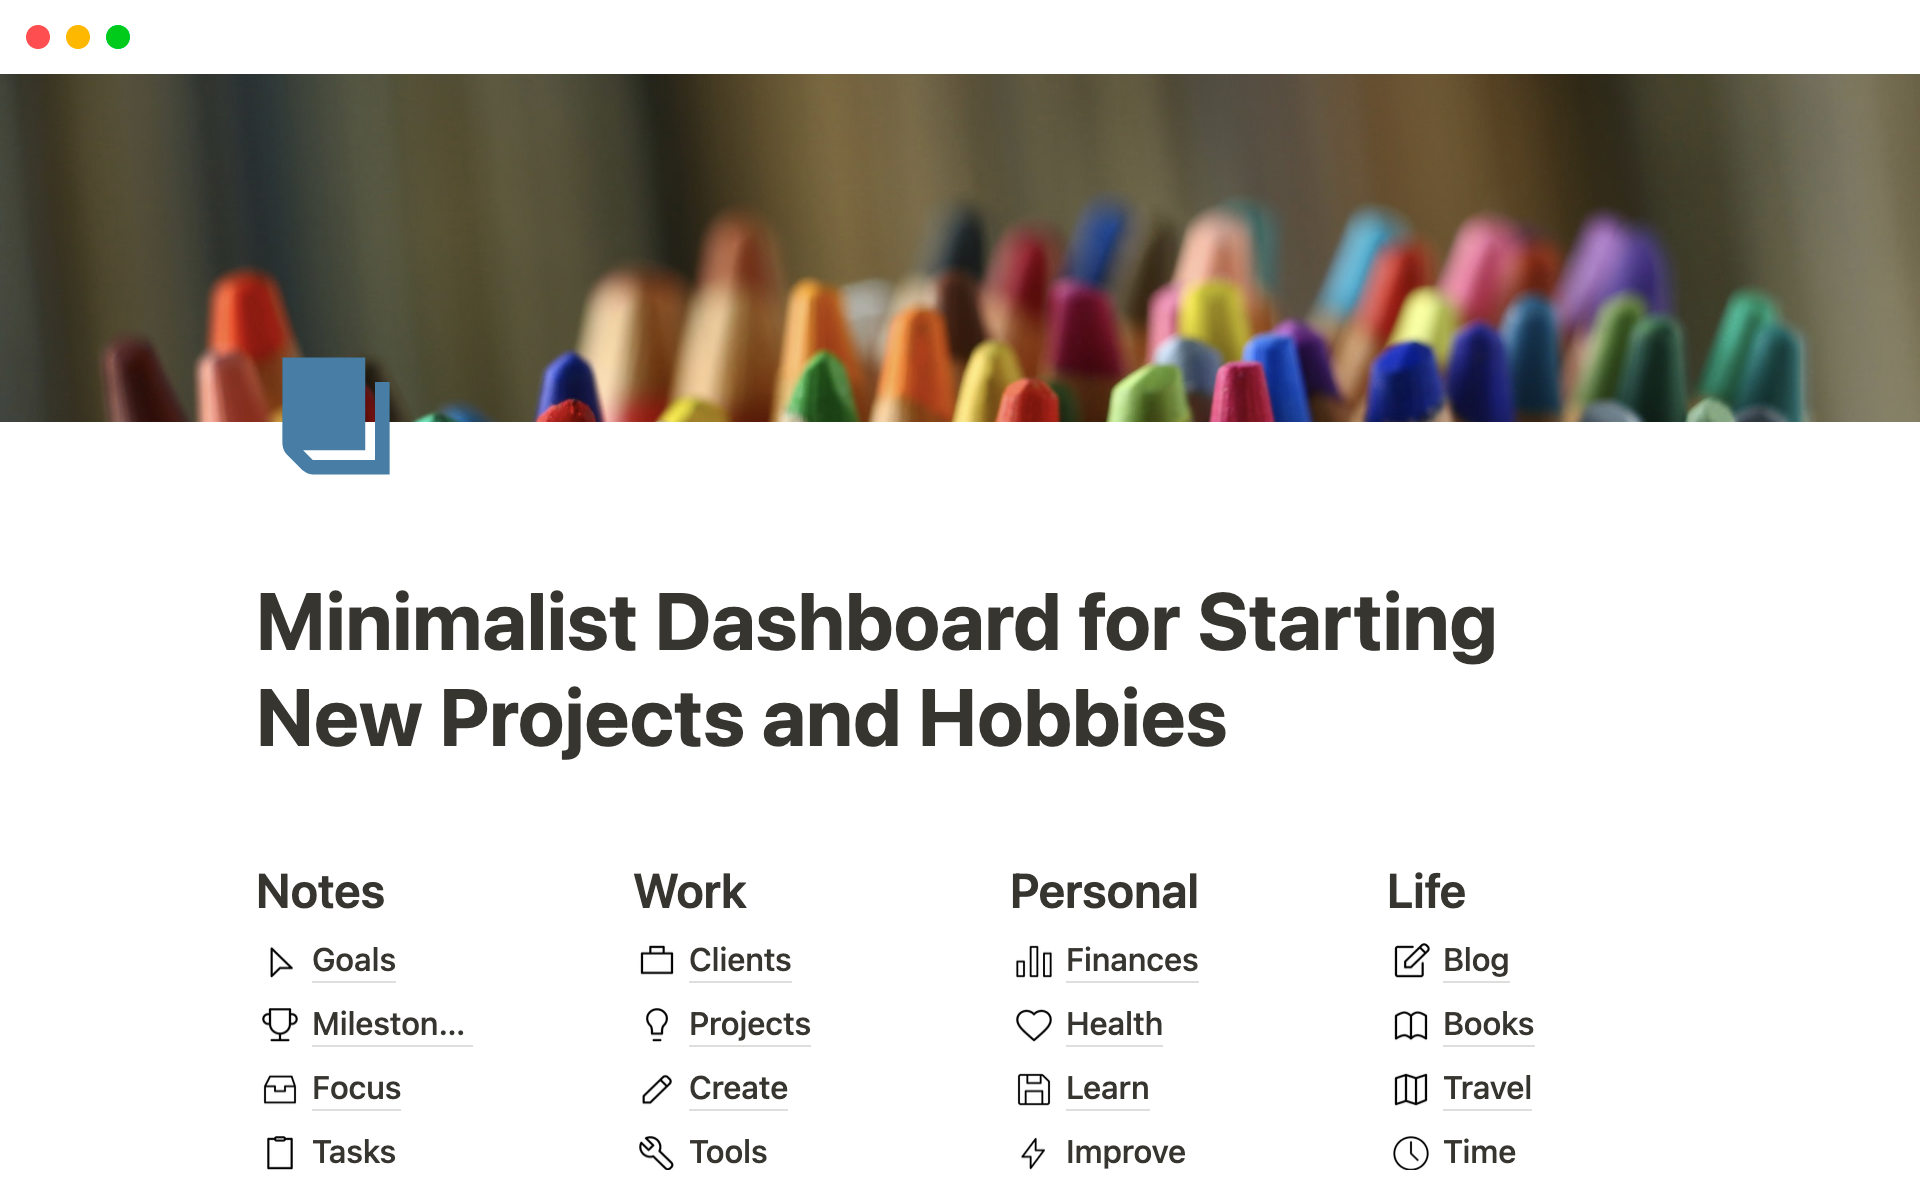 Minimalist Dashboard for Starting New Projects and Hobbiesのテンプレートのプレビュー